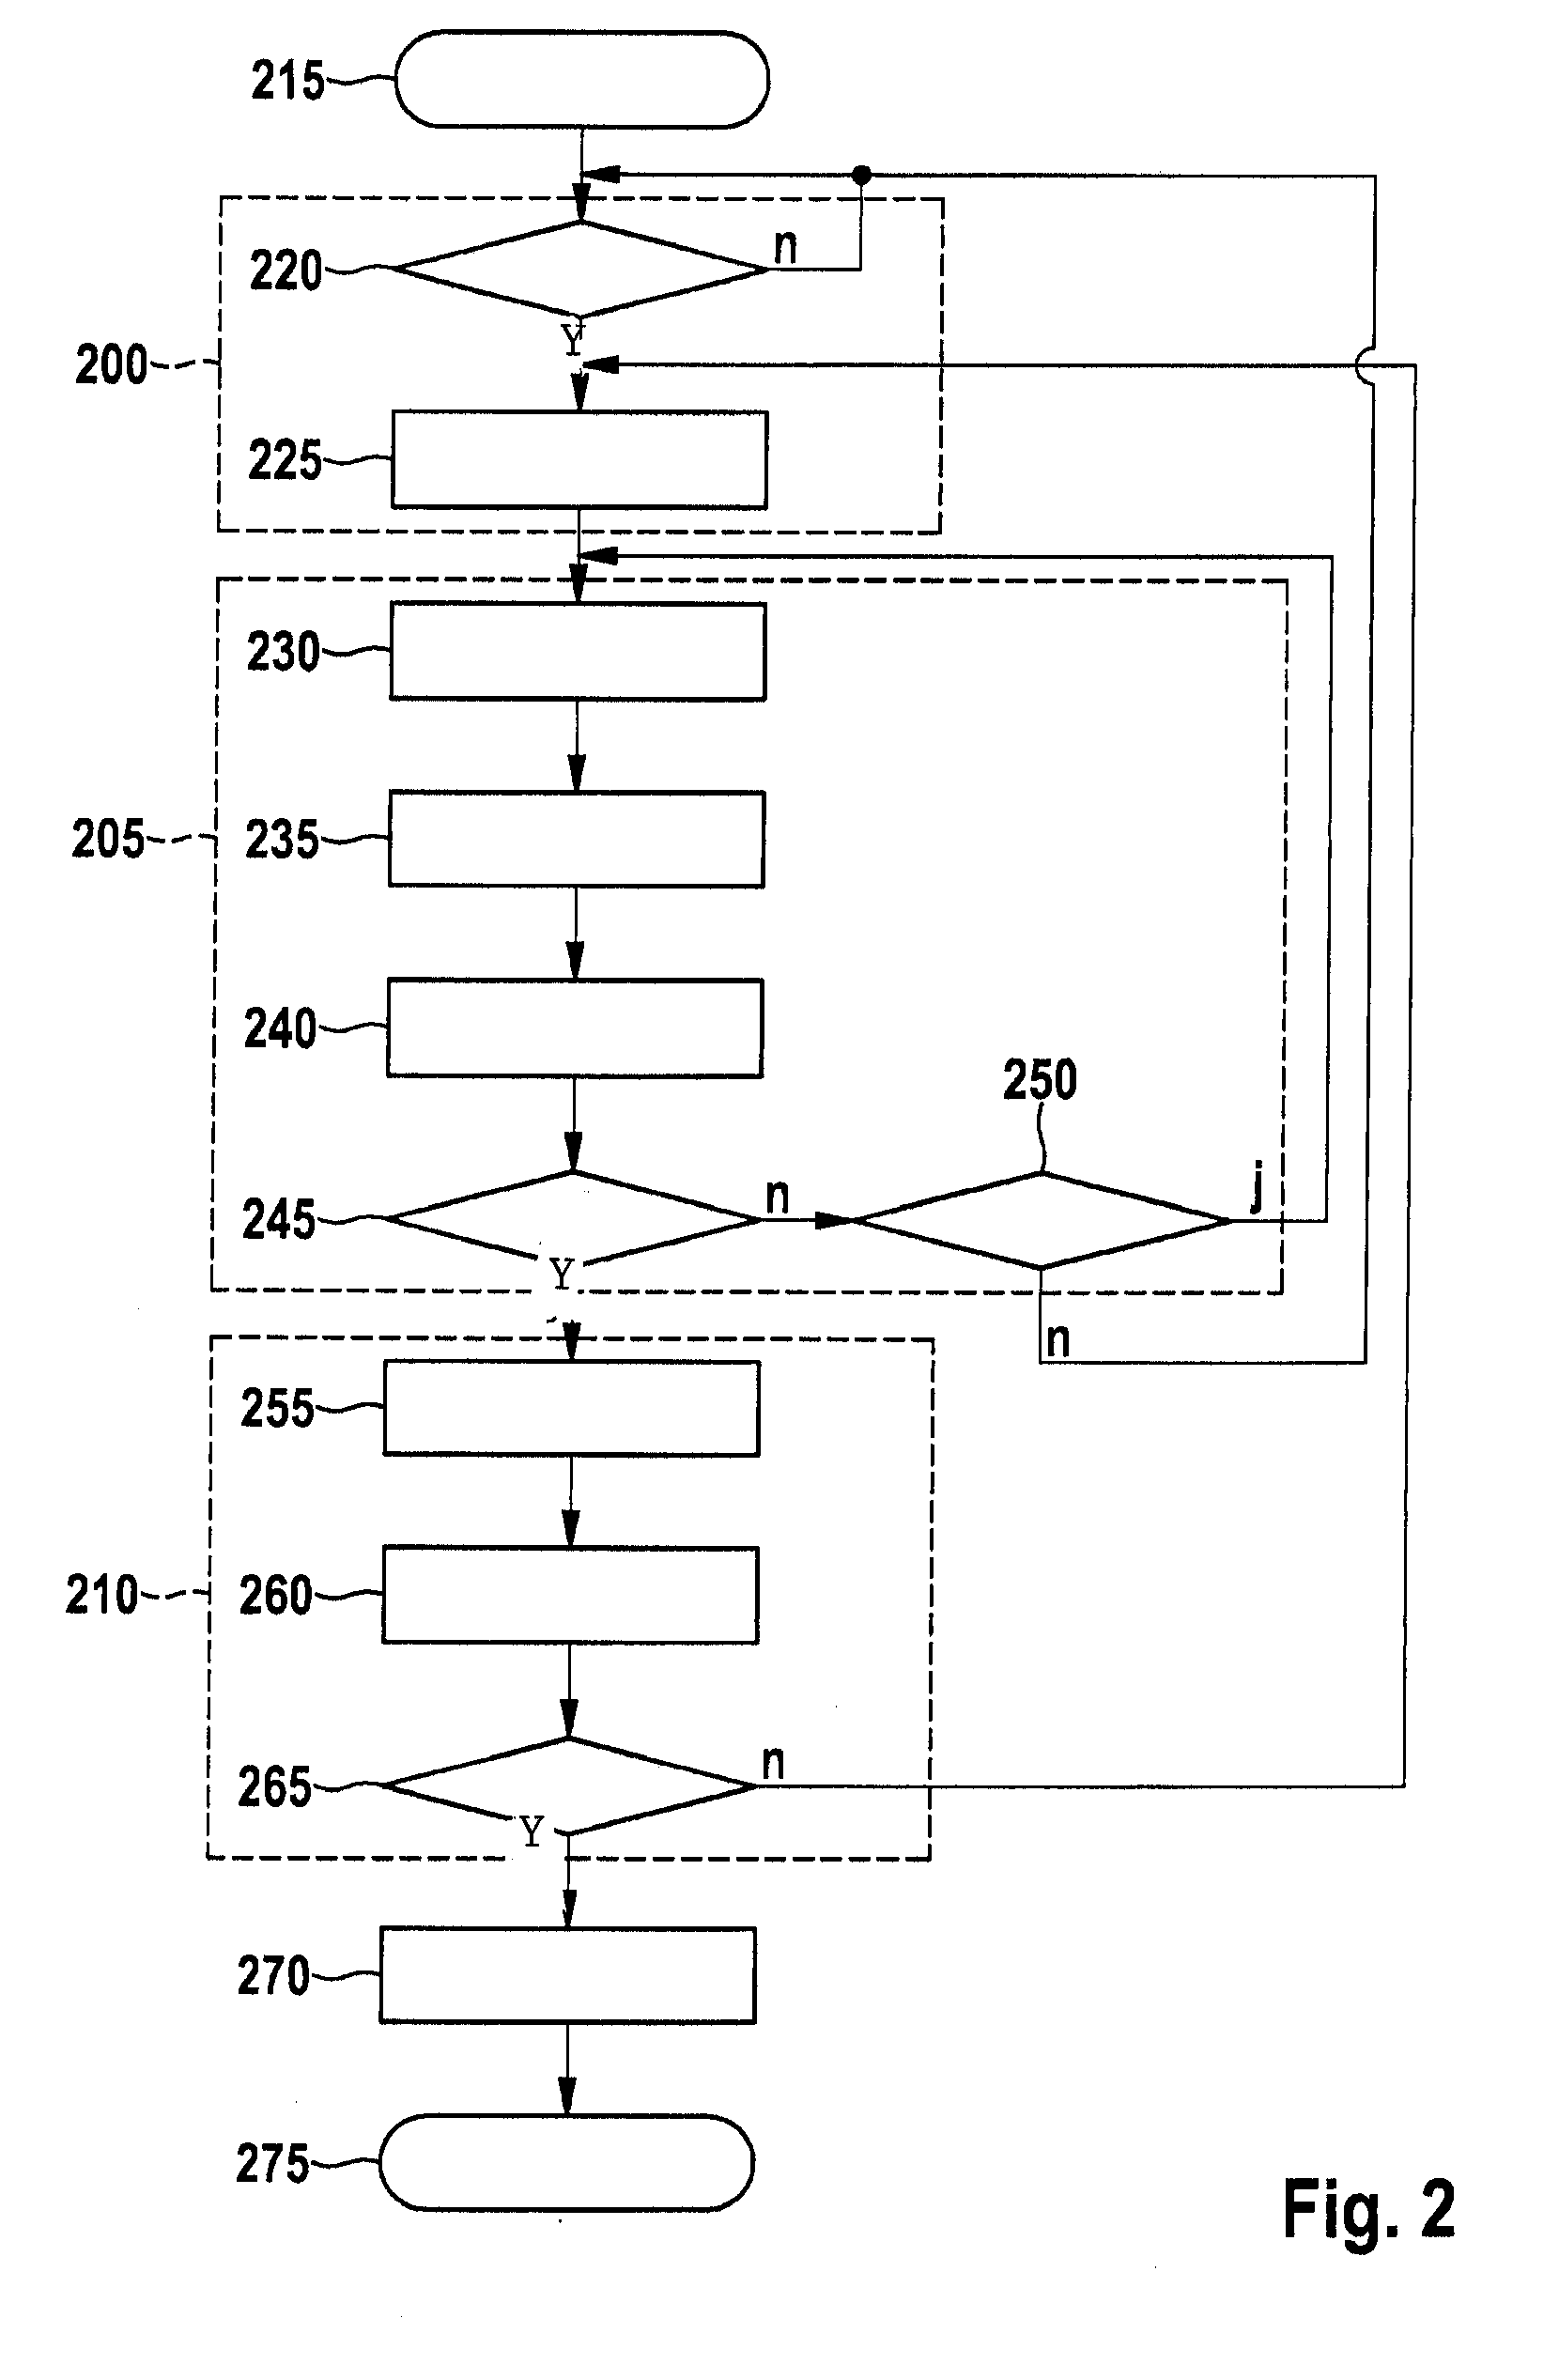 Method and device for operating a fuel injection device, especially of a motor vehicle